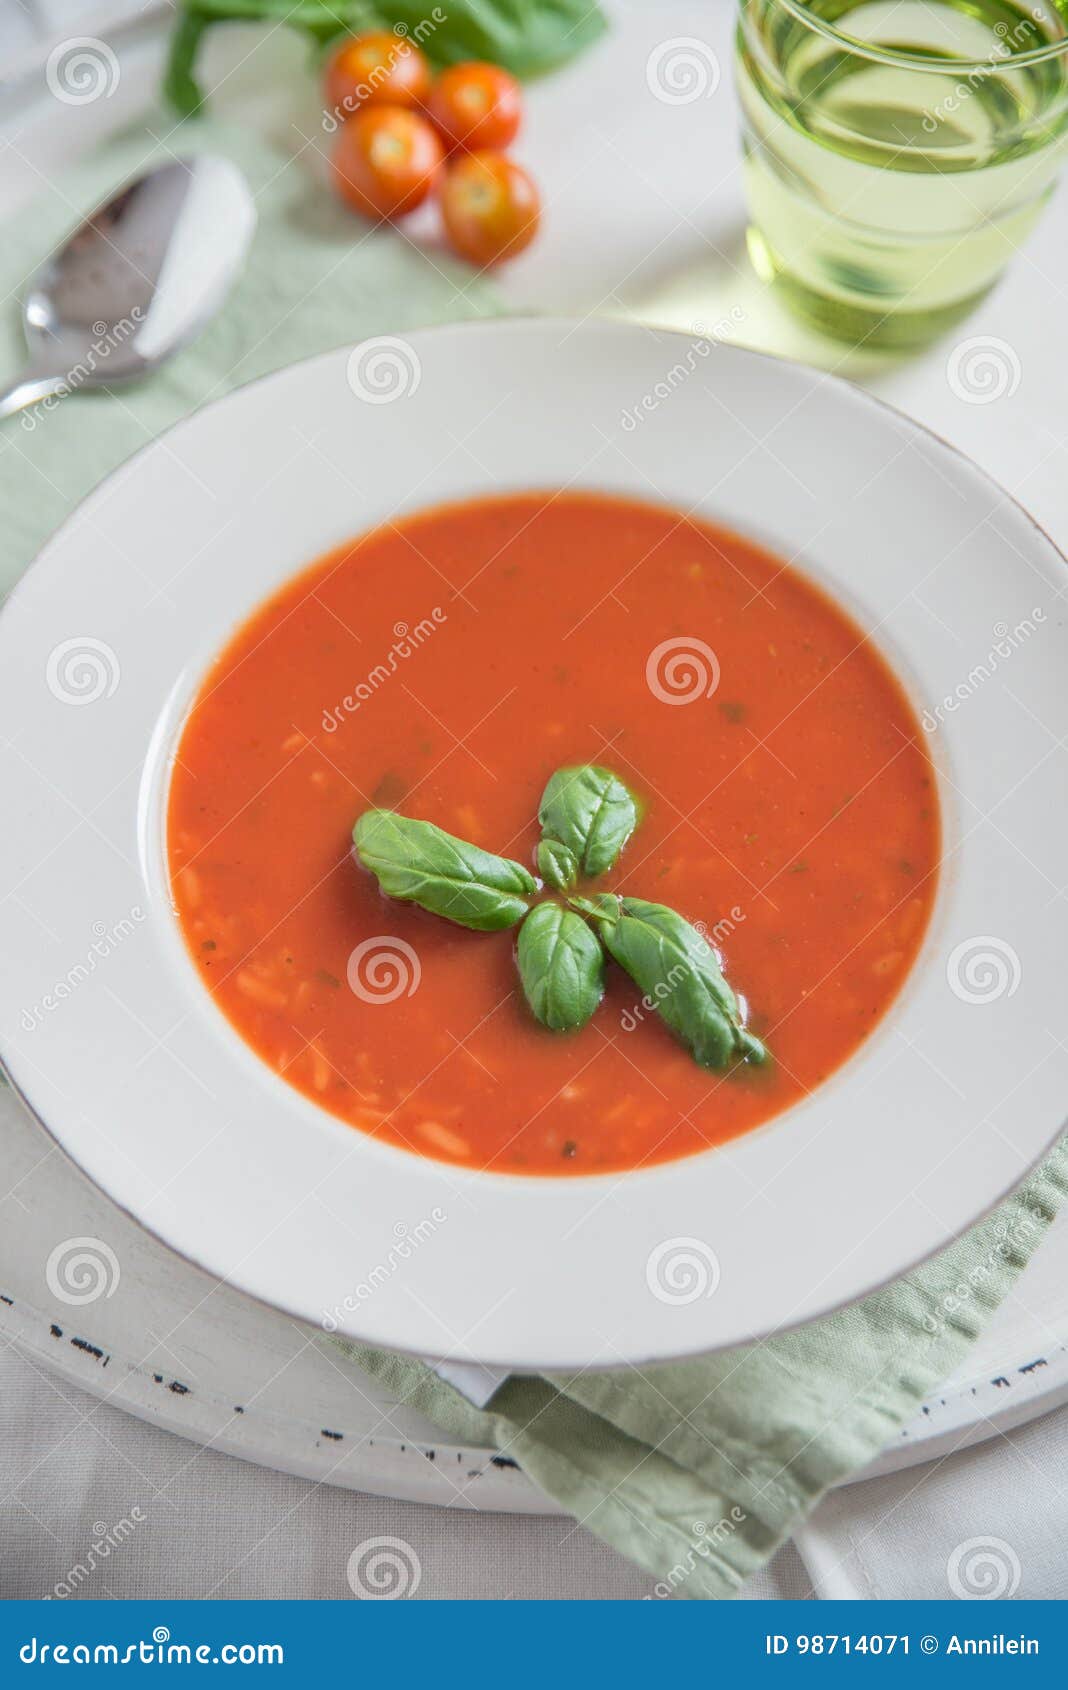 Tomato Soup with Basil Leaves in a Bowl Stock Image - Image of healthy ...